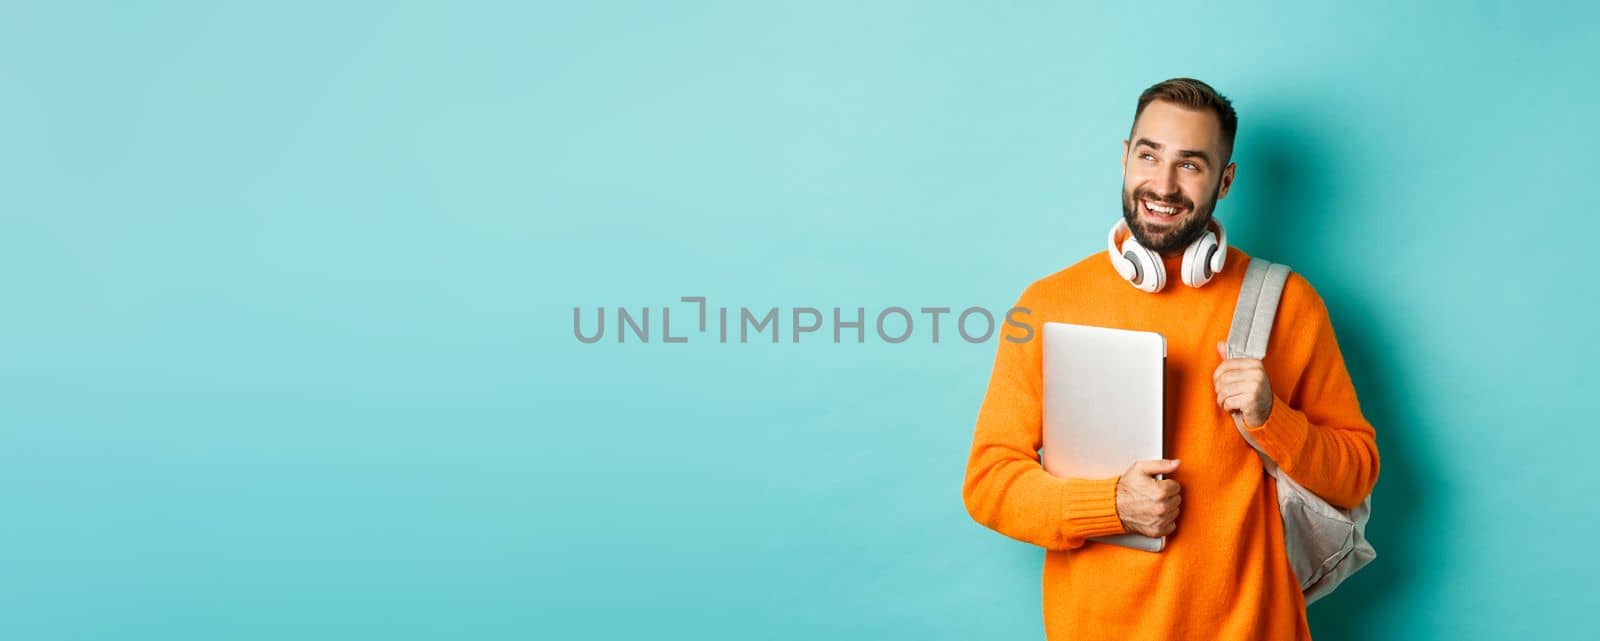 Happy man with backpack and headphones, holding laptop and smiling, looking left thoughtful, standing over turquoise background.